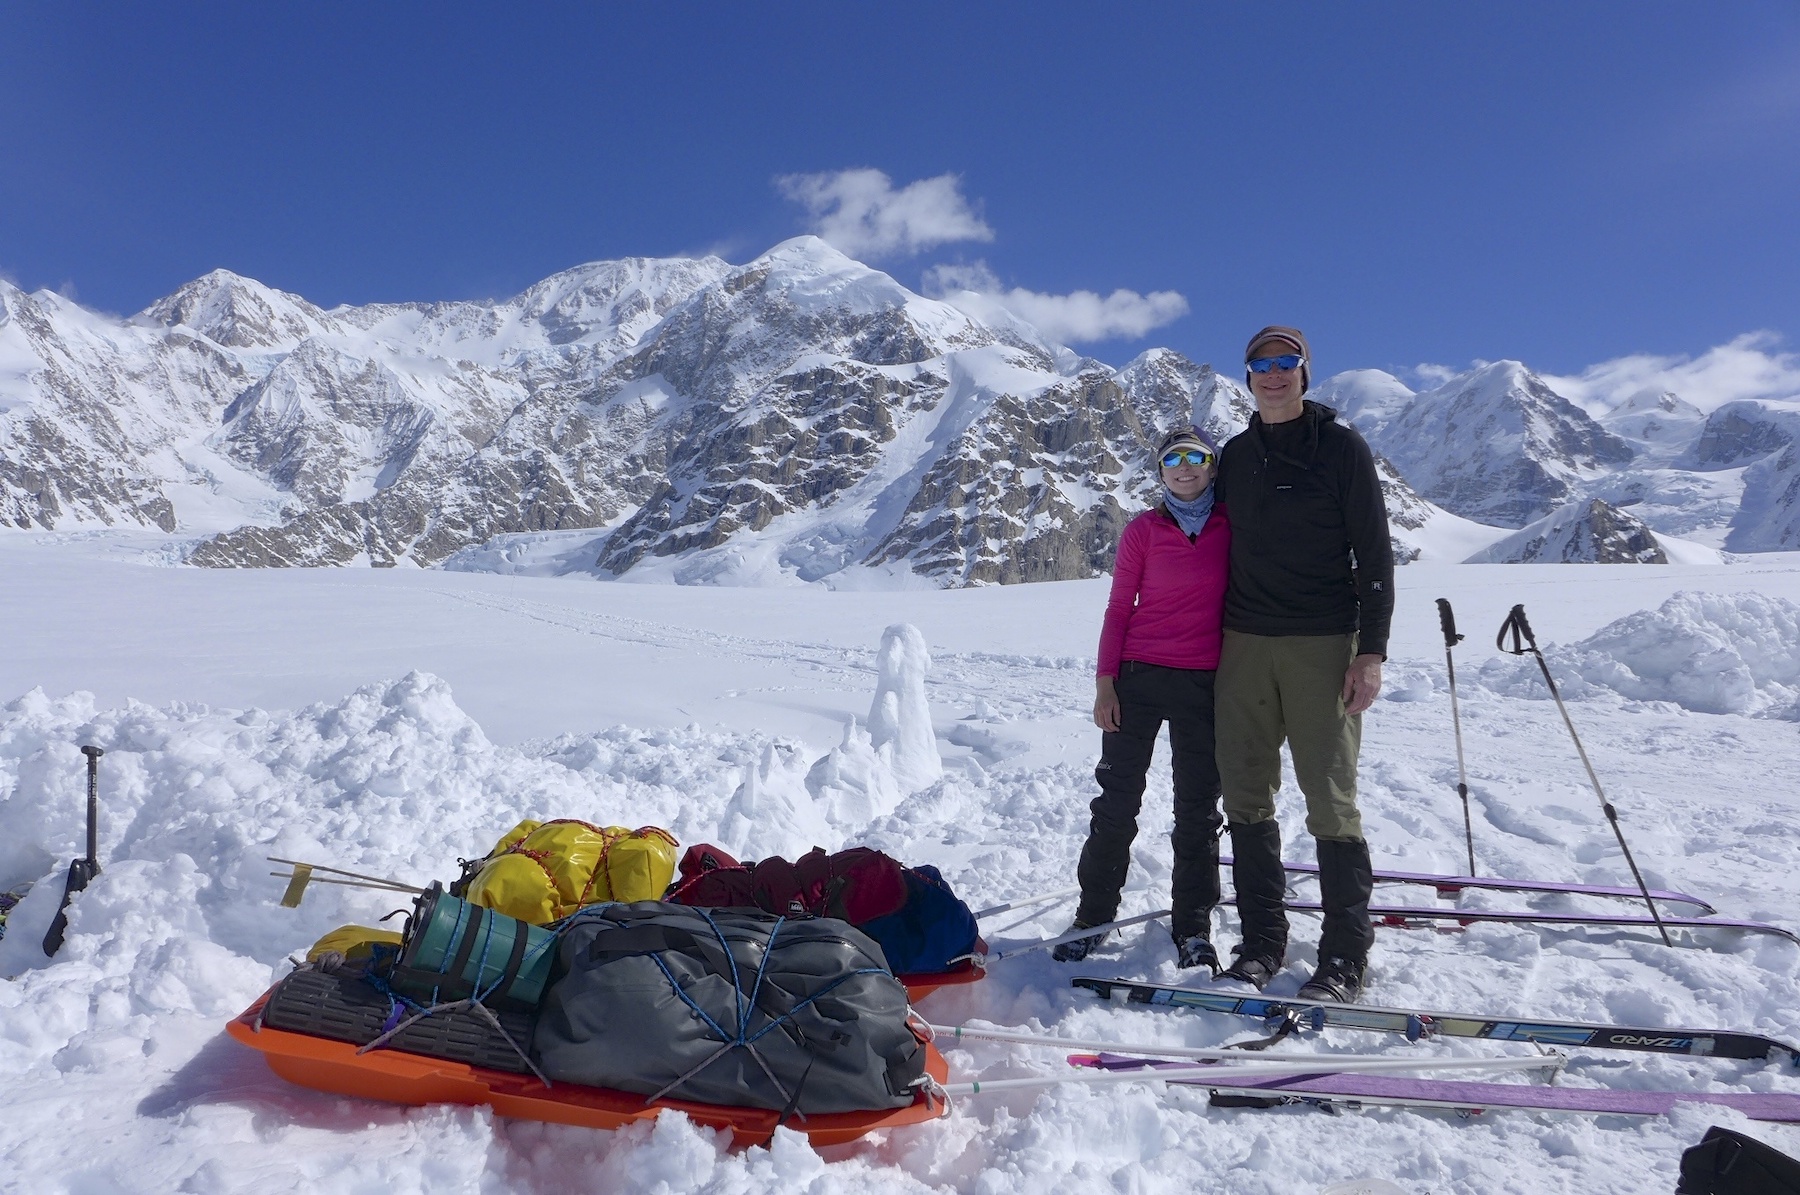 A man and his daughter stand together on a snow-covered glacier with snowy and rocky mountains in the background.